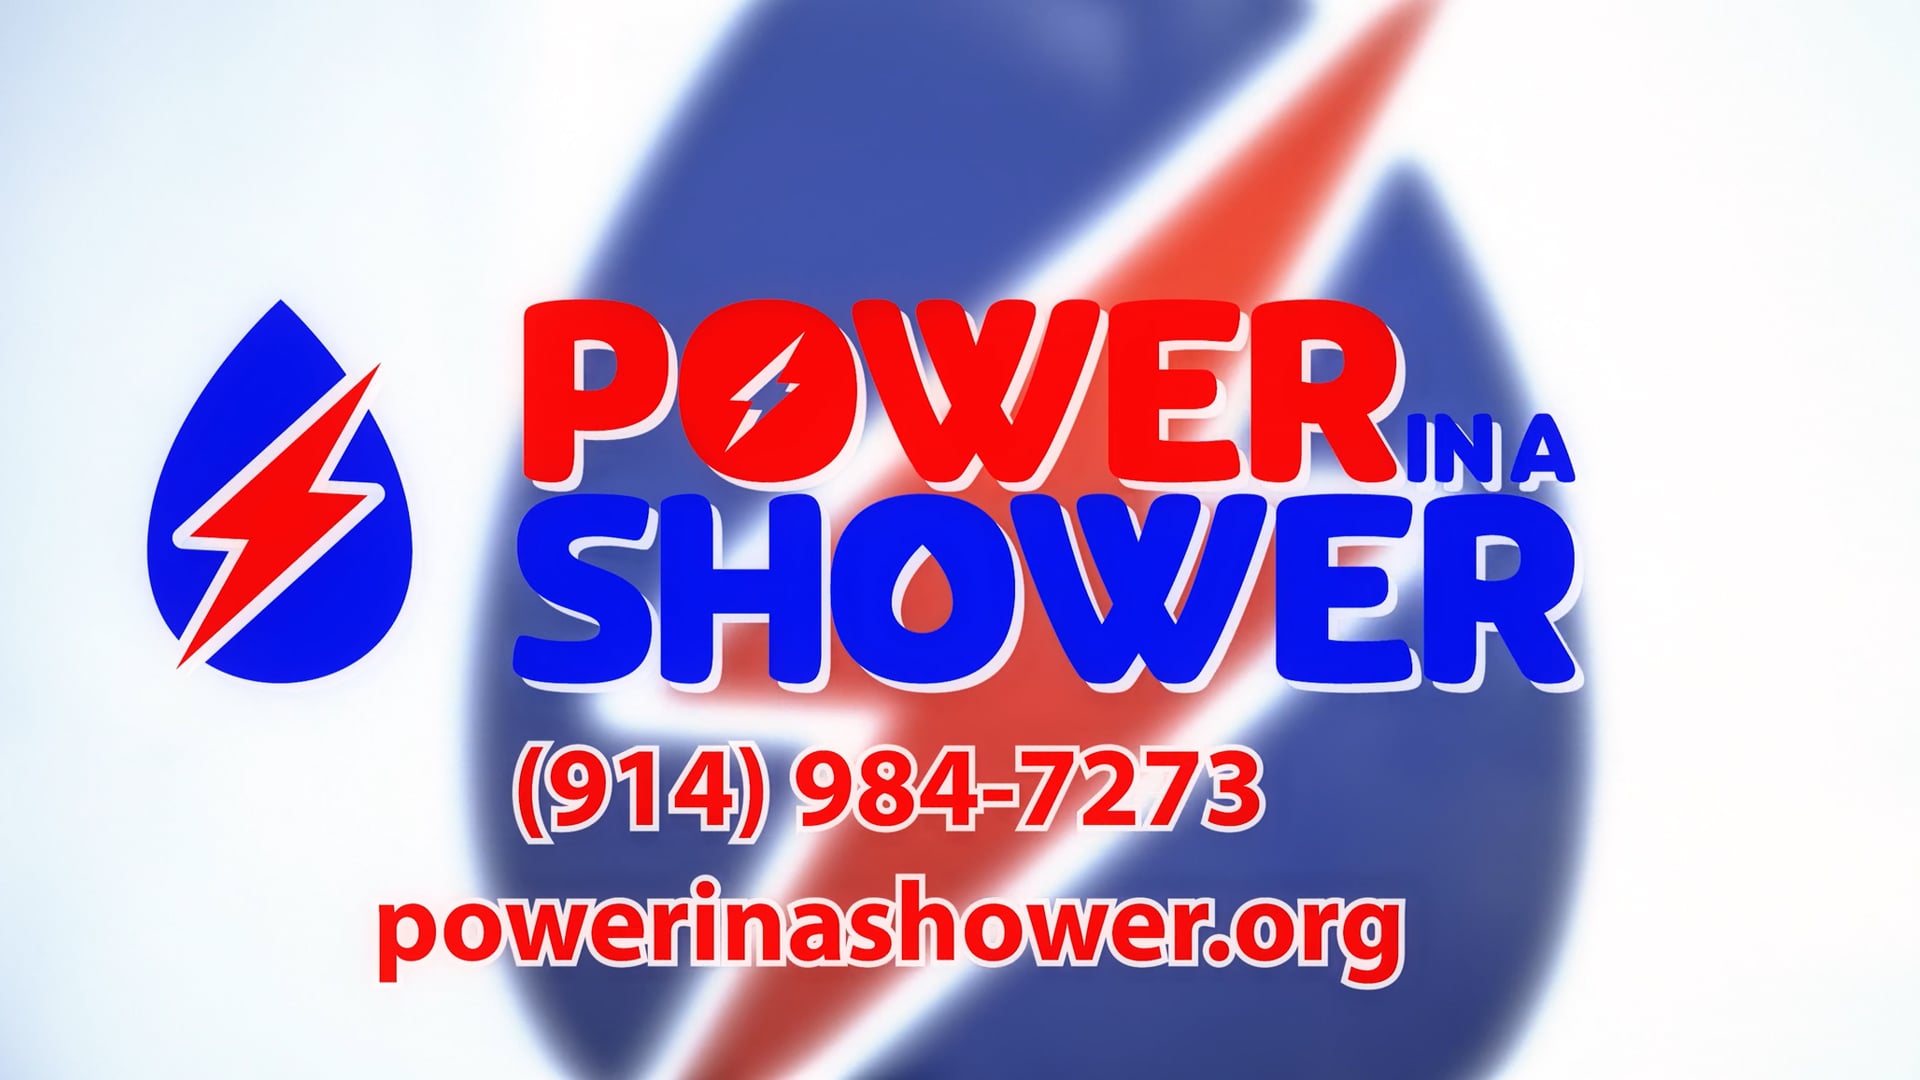 POWER IN A SHOWER PROMO